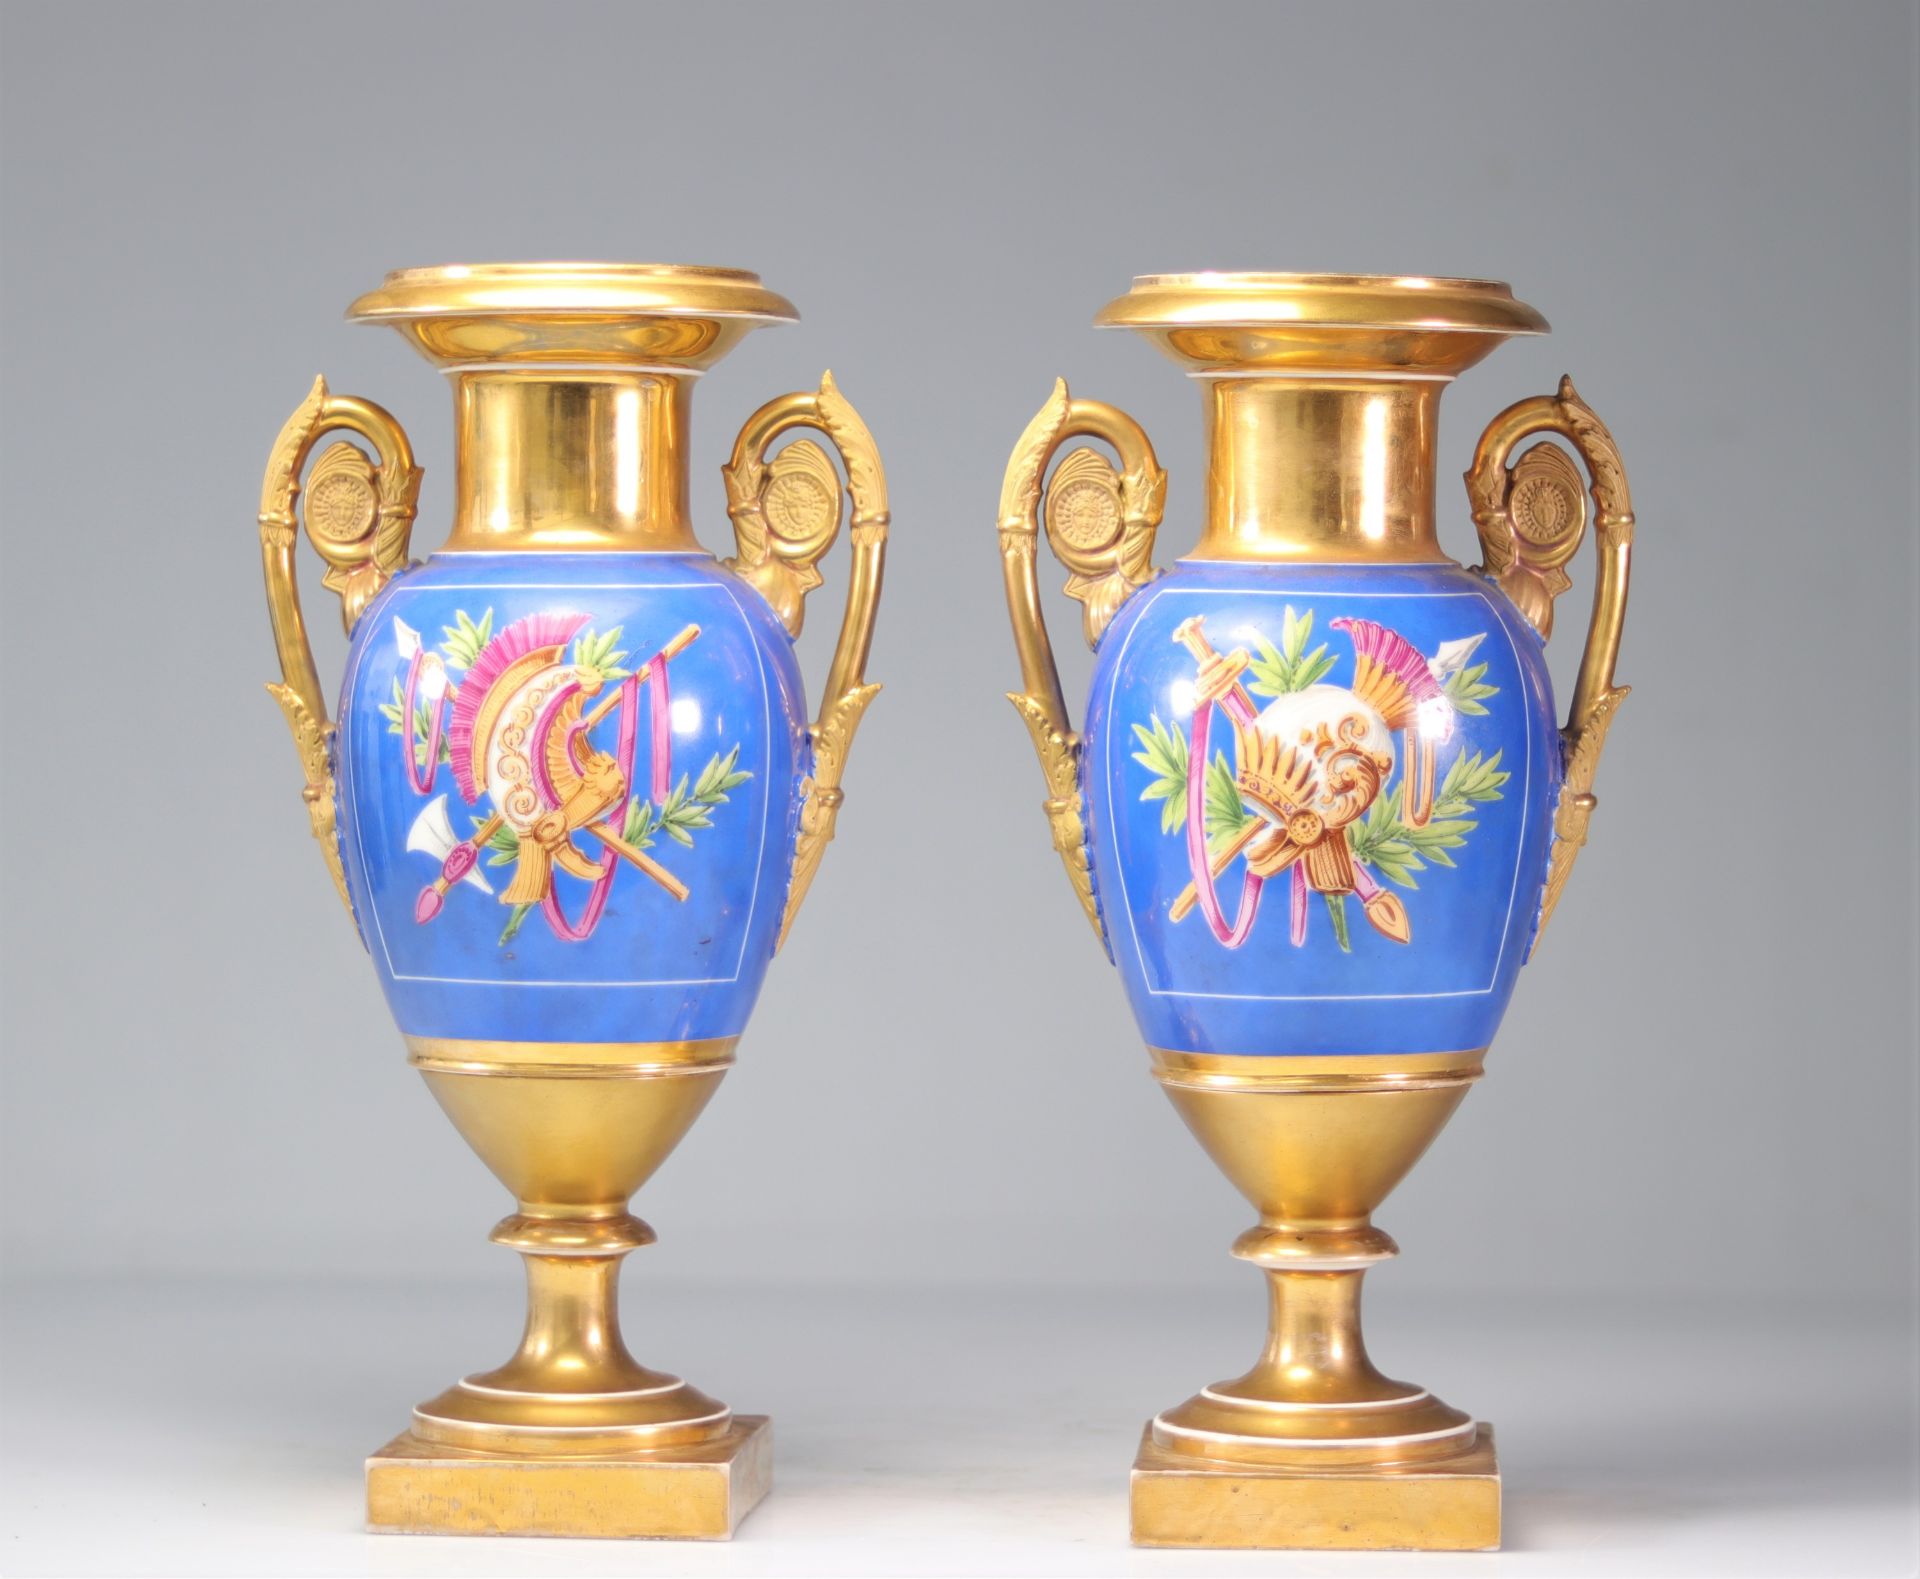 Pair of Empire period vases with port scenes "Port Louis and Dunkirk" - Image 2 of 5